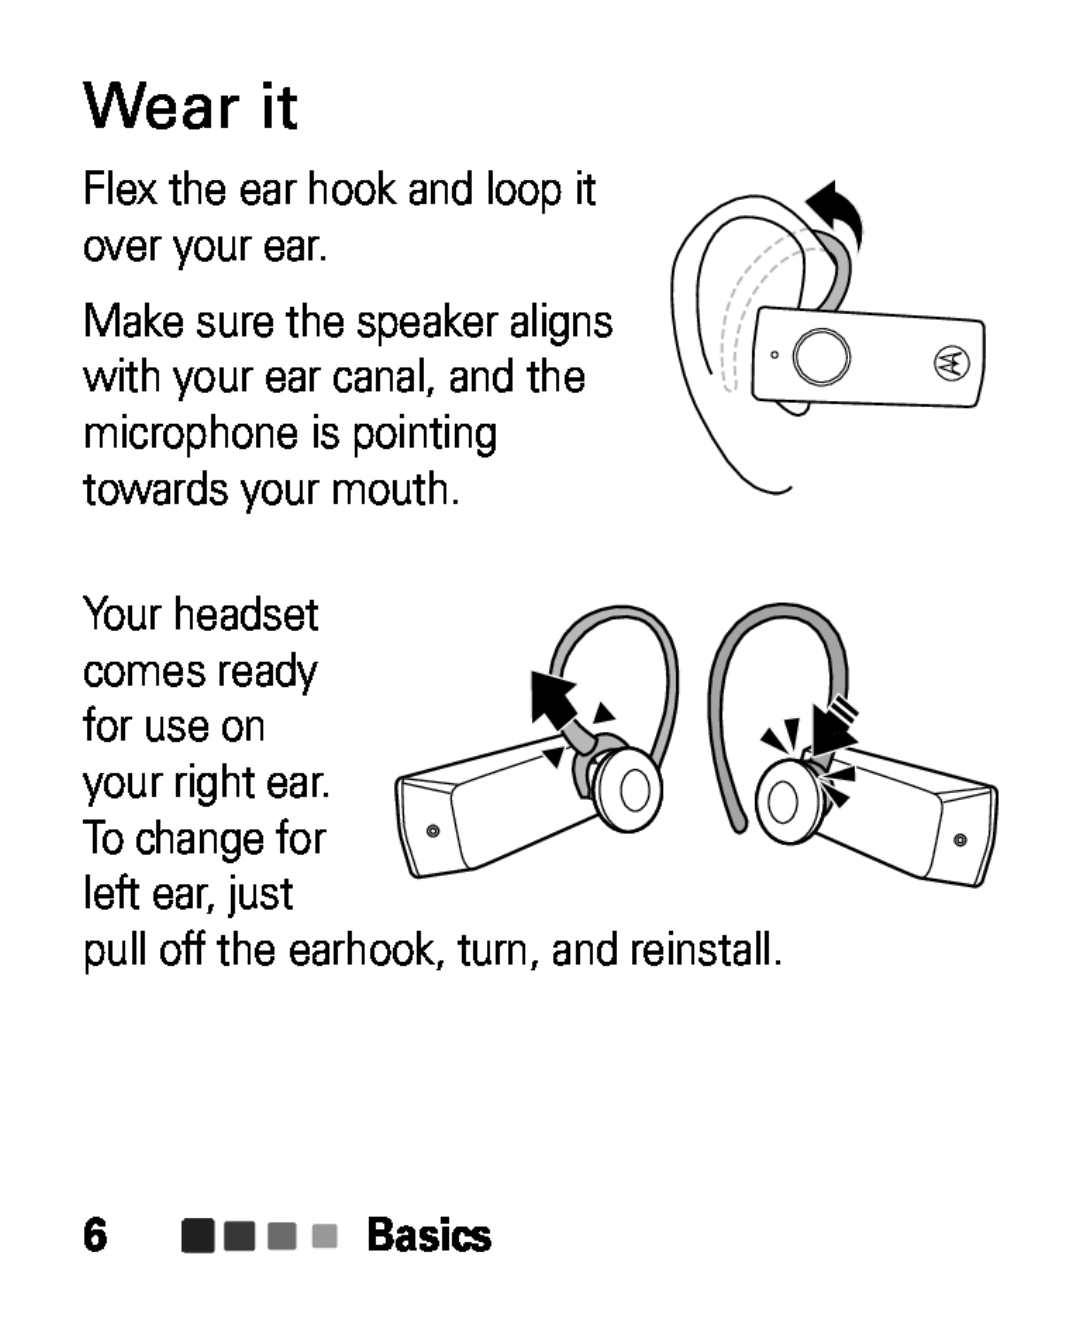 Motorola HK100 Wear it, Flex the ear hook and loop it over your ear, left ear, just, Your headset comes ready, Basics 